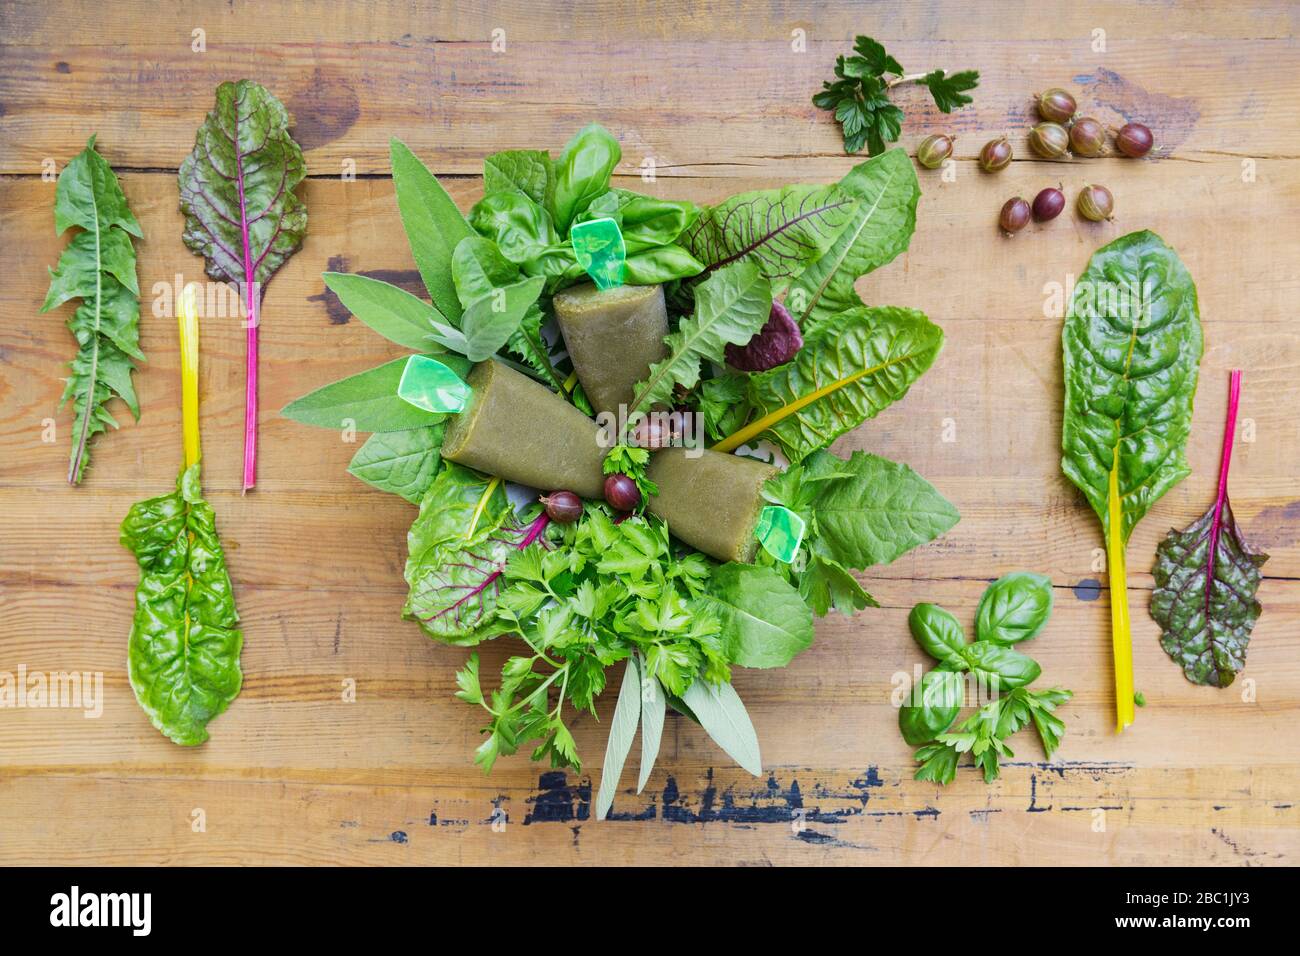 Overhead view of homemade green vegetables and herb popsicles on wooden table Stock Photo